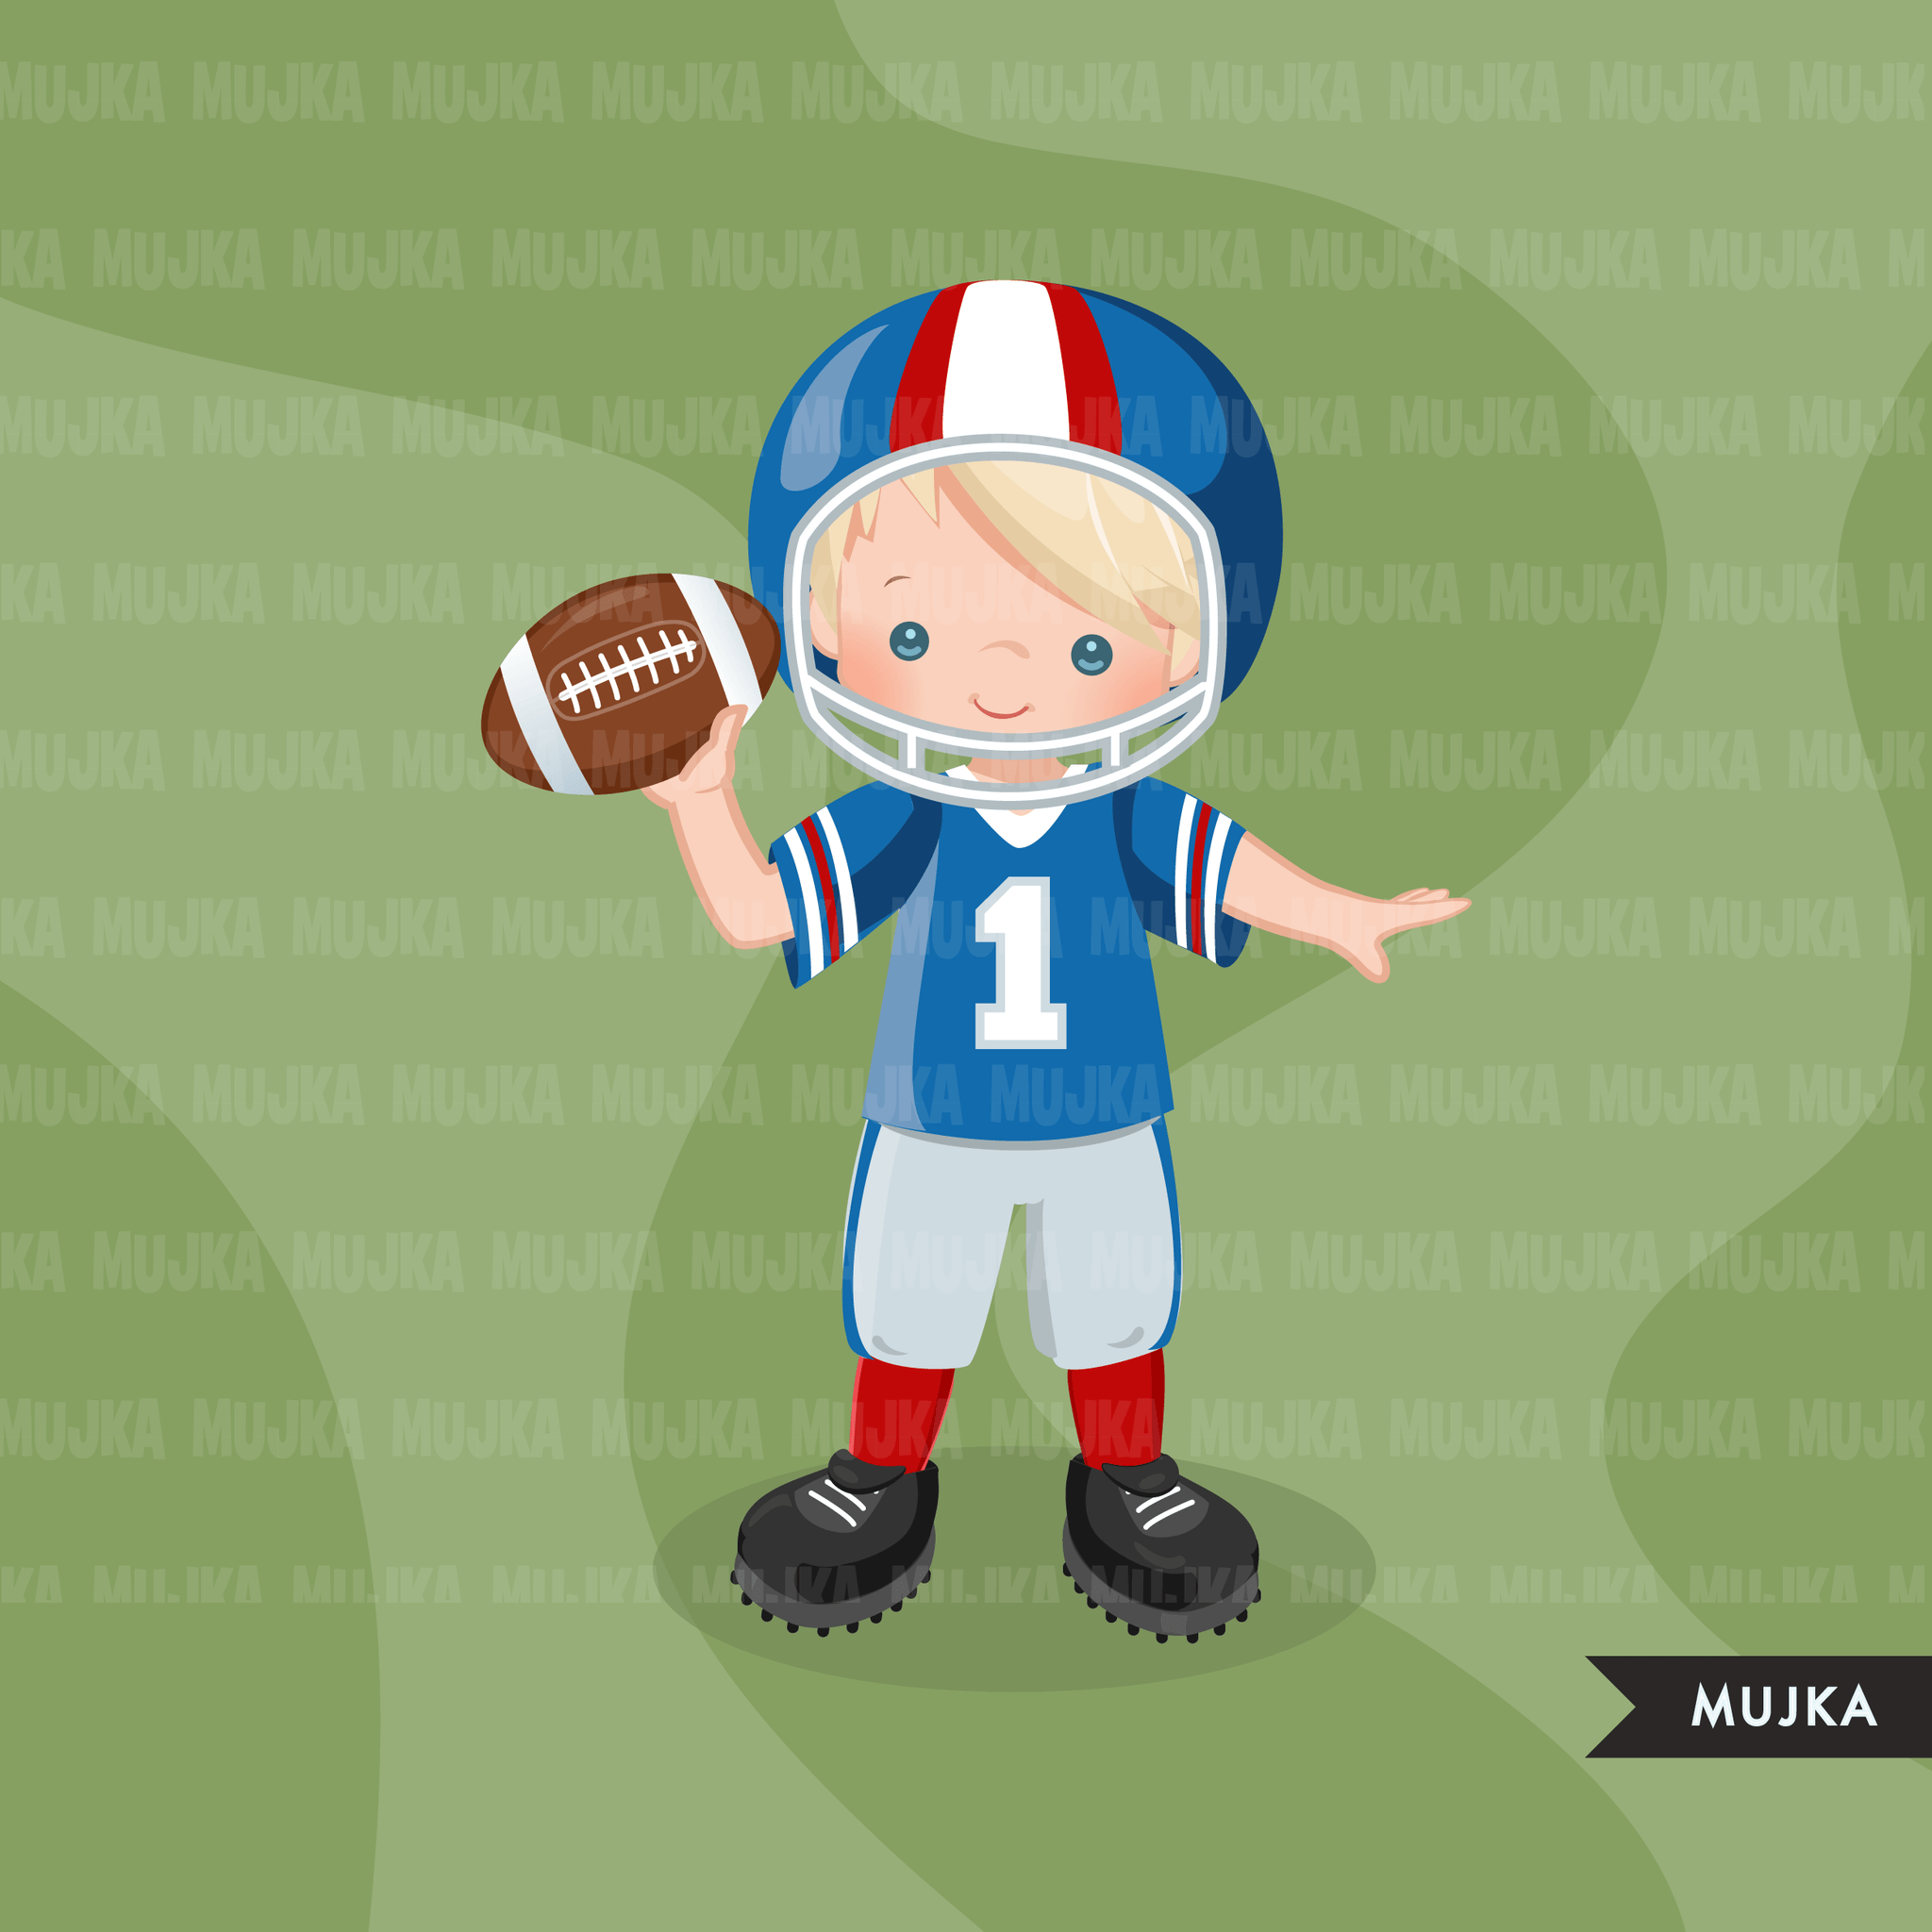 American Football Player Clipart Playing Football Clipart 